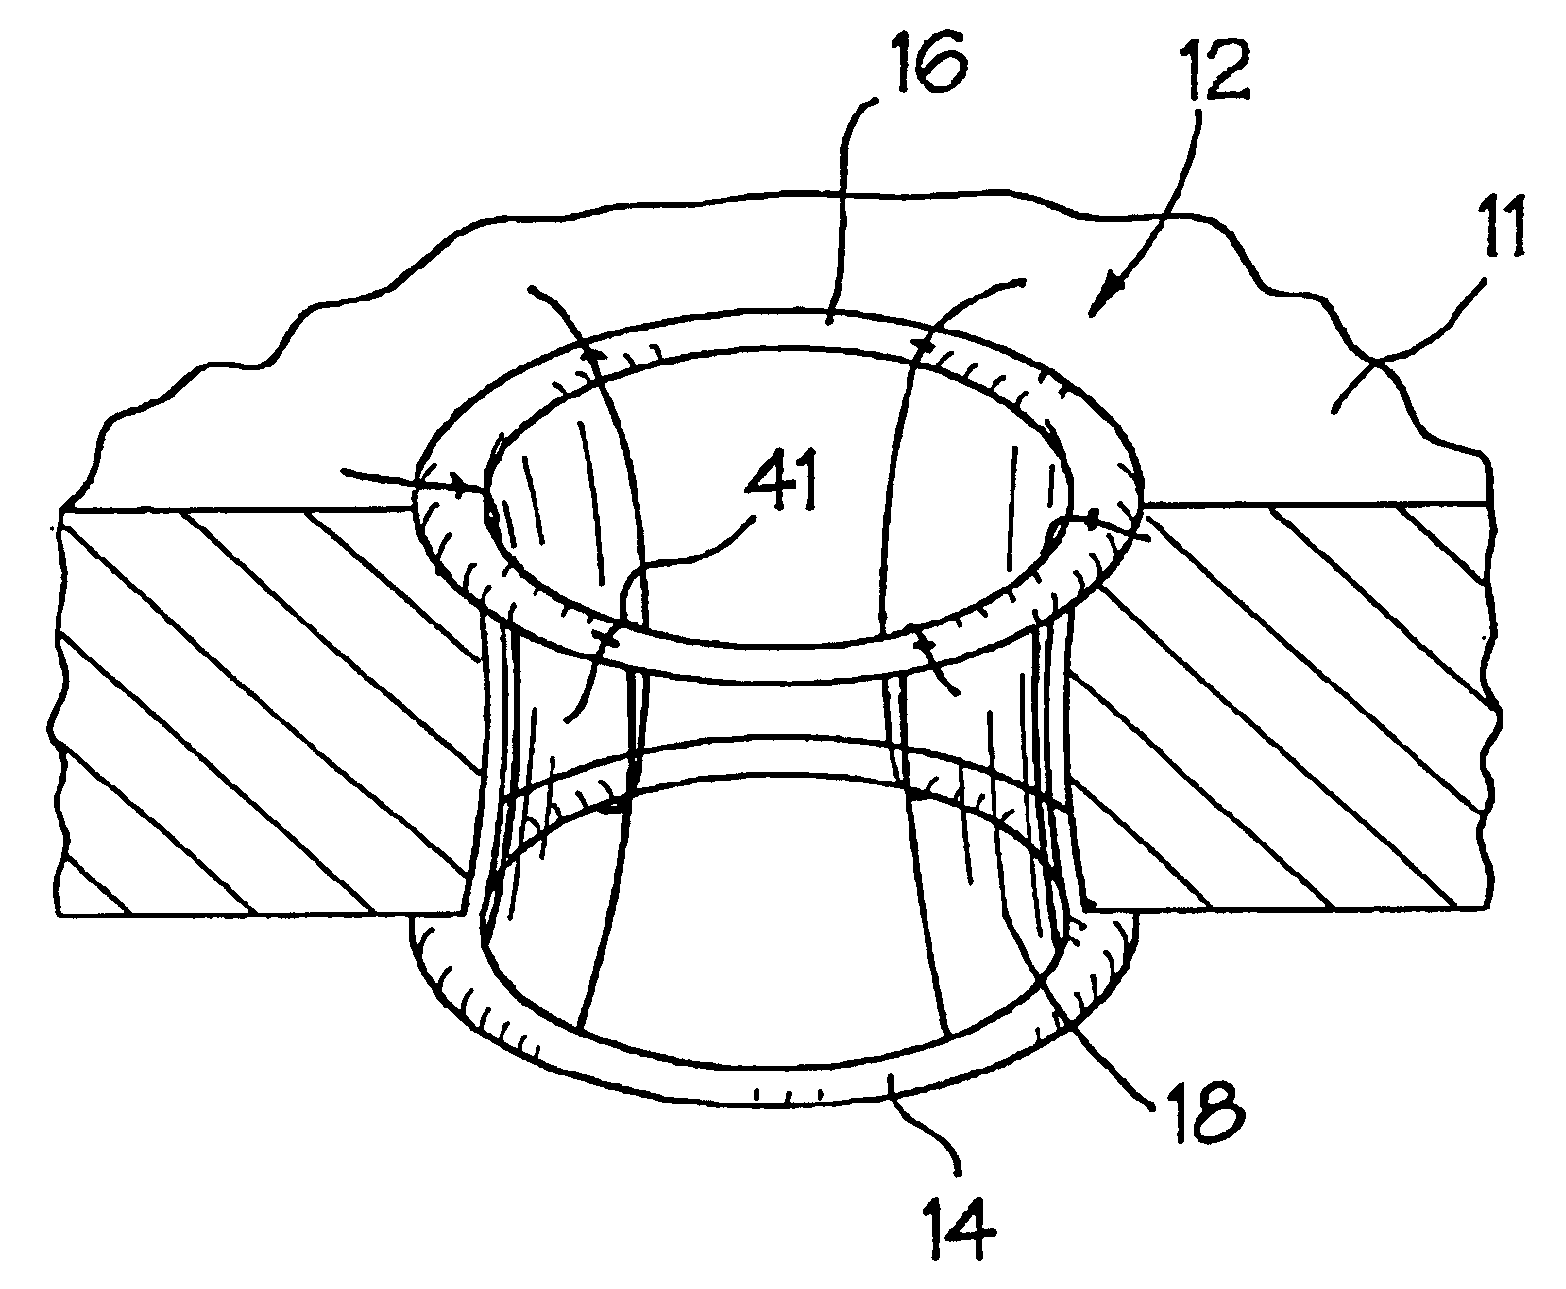 Wound retraction apparatus and method